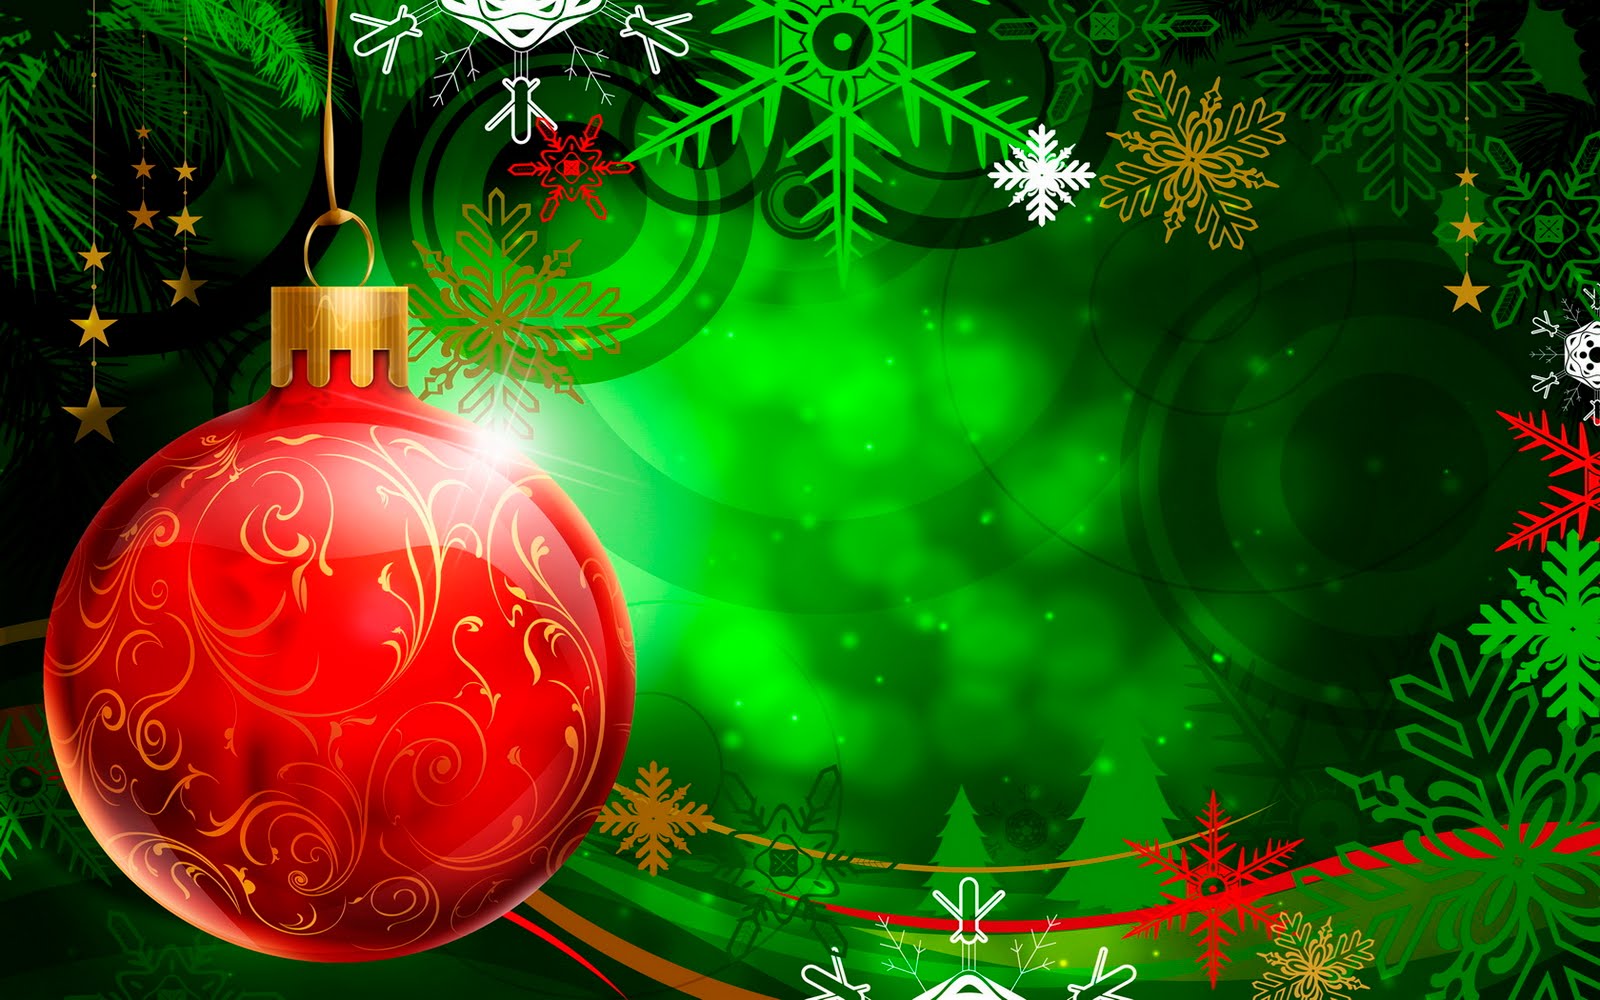 High Definition Photo and Christmas Walpaper image